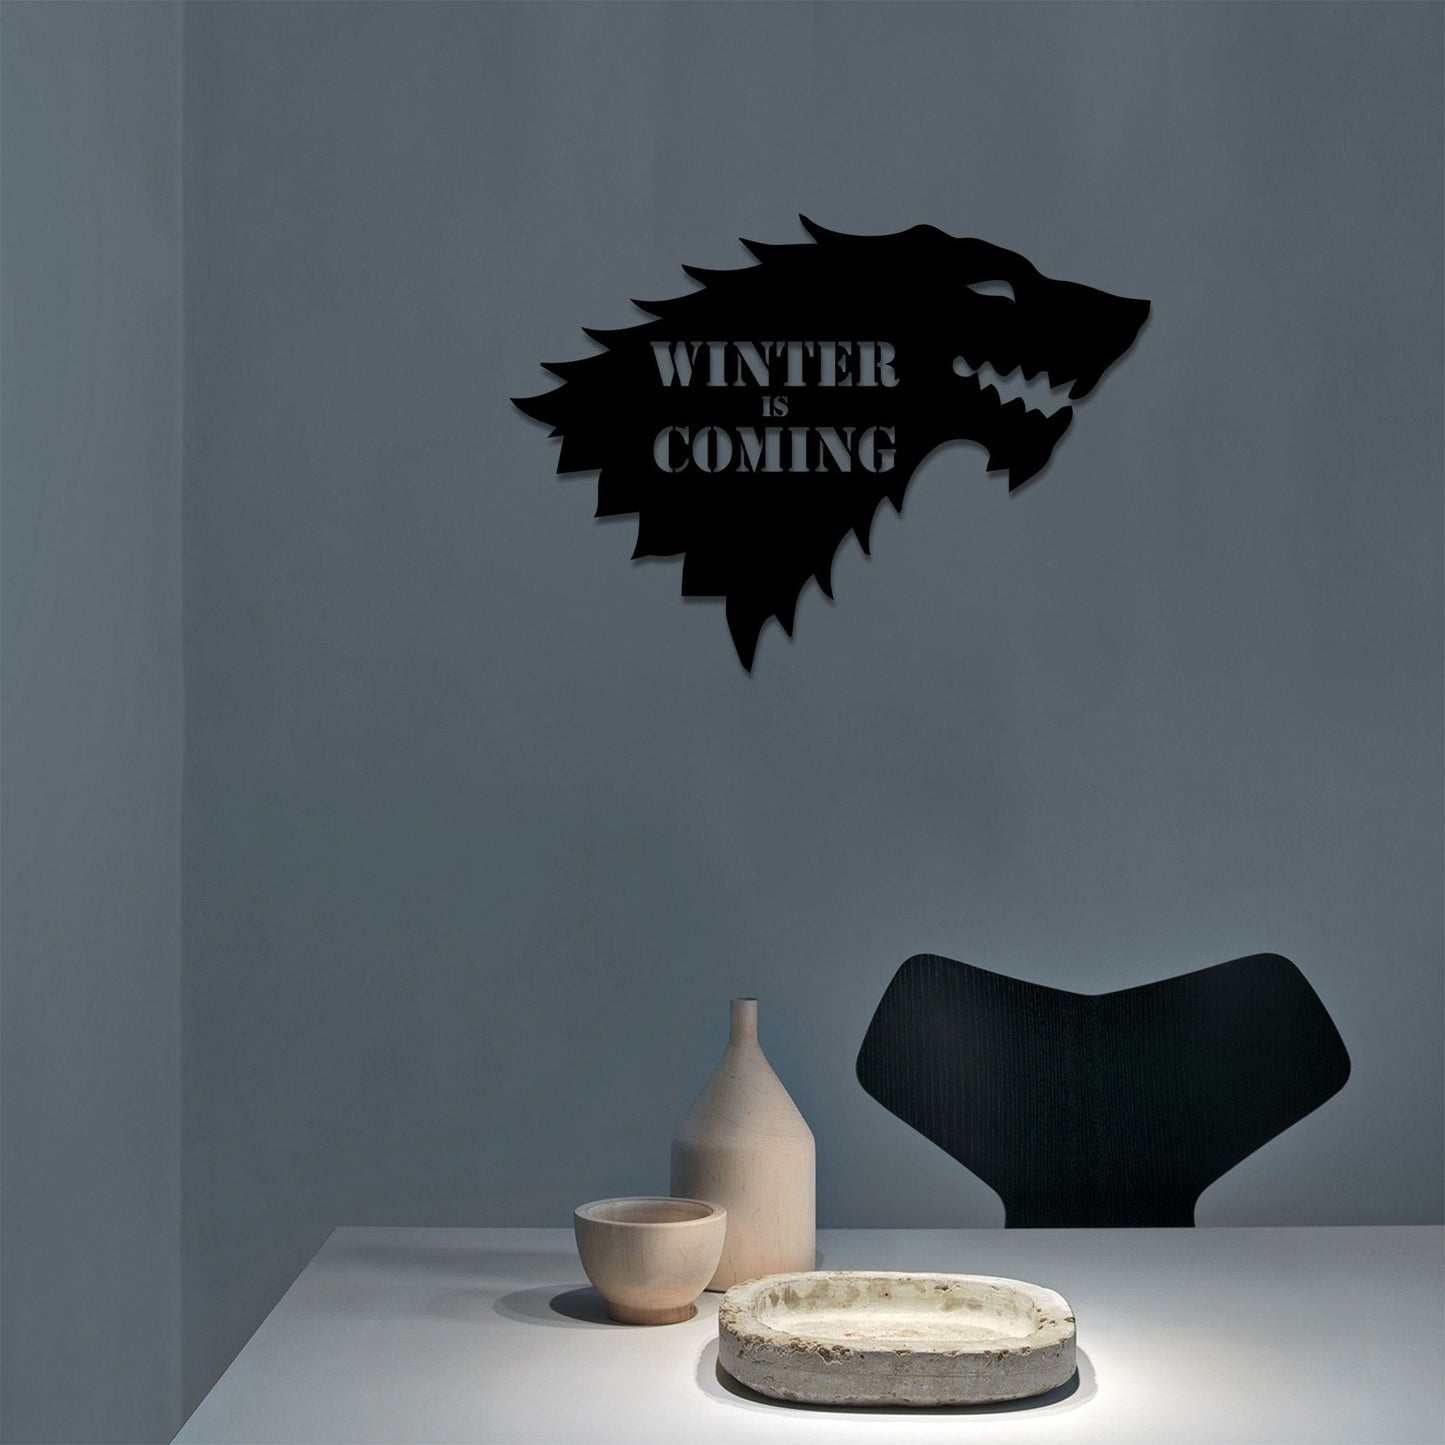 Winter İs Comming - Decorative Metal Wall Accessory